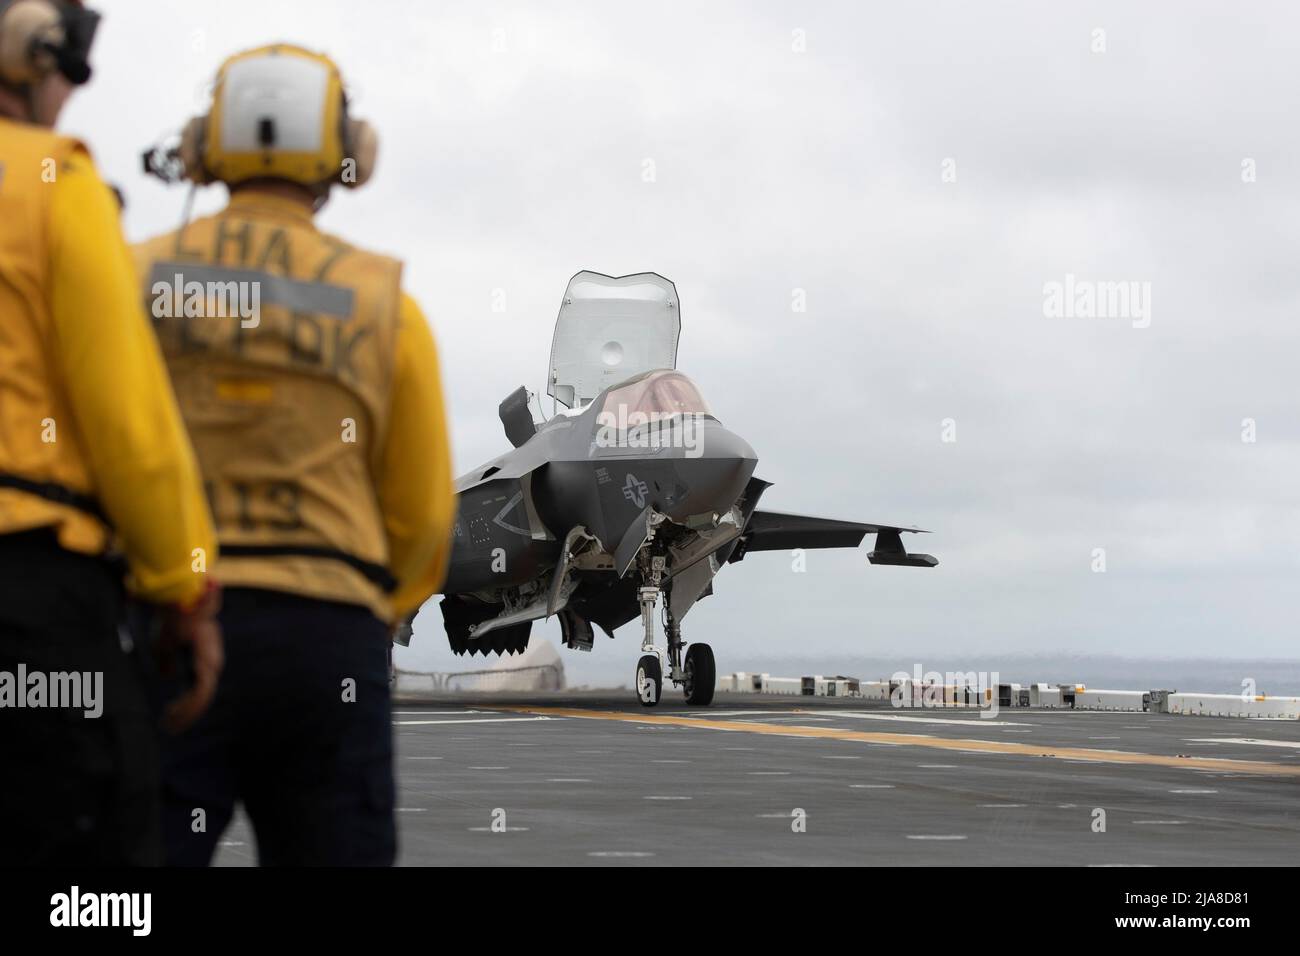 220526-XN177-1198 PACIFIC OCEAN (May 26, 2022) – An F-35B Lightning II aircraft assigned to Marine Fighter Attack Squadron (VMFA) 121 lands aboard amphibious assault carrier USS Tripoli (LHA 7), May 26, 2022. Tripoli is conducting routine operations in U.S. 7th Fleet. (U.S. Navy photo by Mass Communication Specialist 1st Class Peter Burghart) Stock Photo